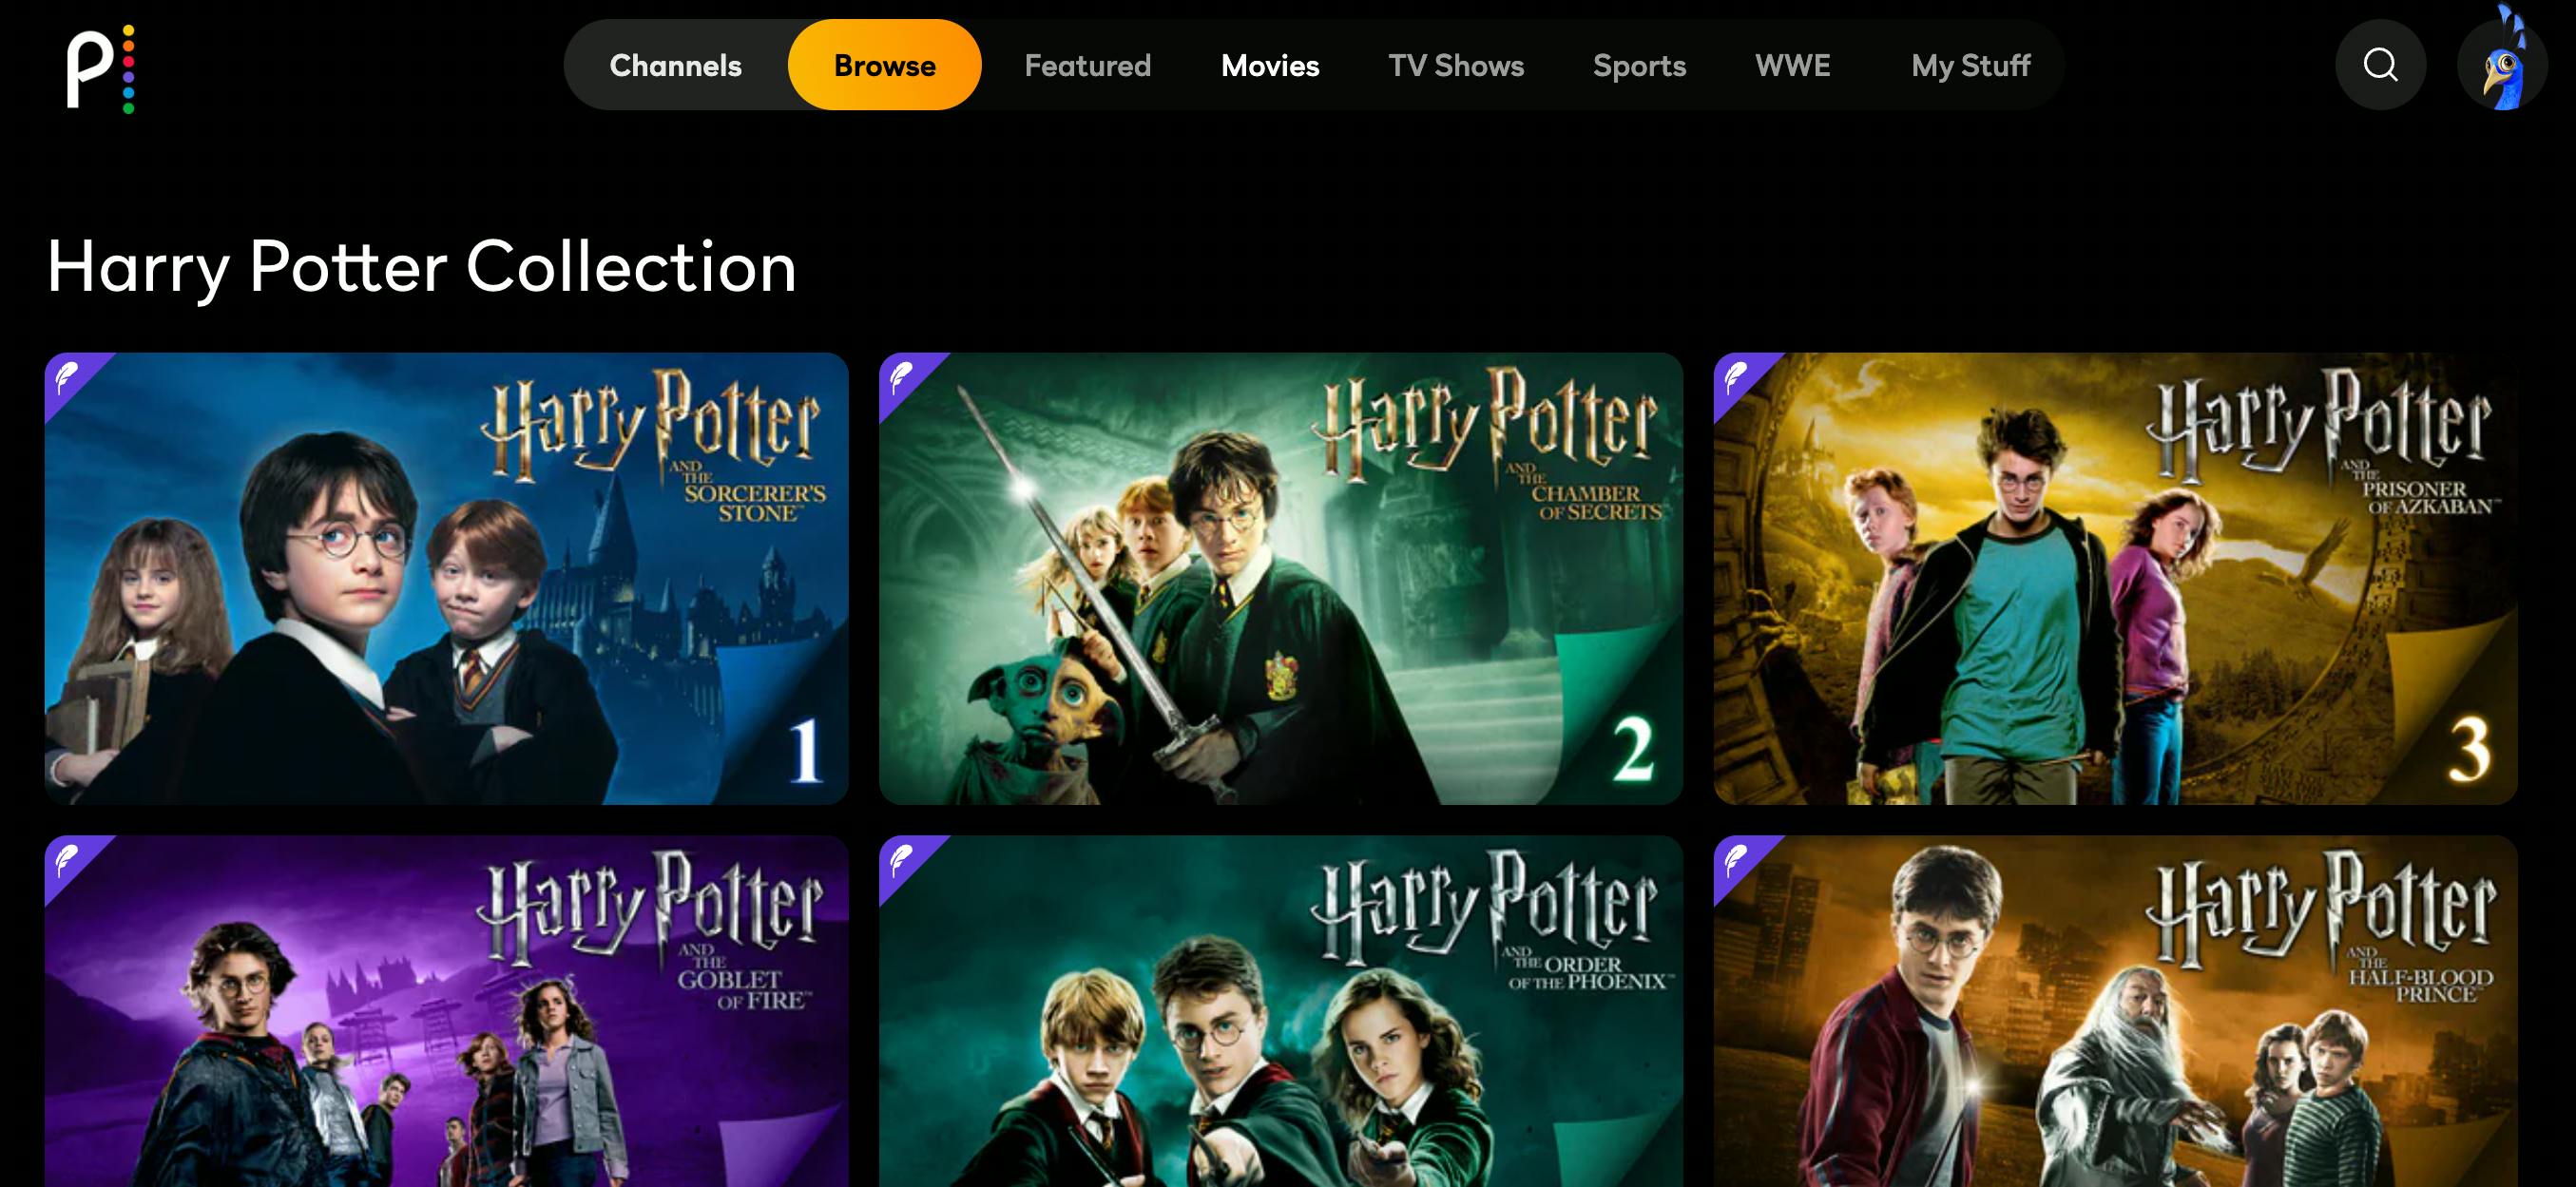 peacock tv harry potter collection page screenshot